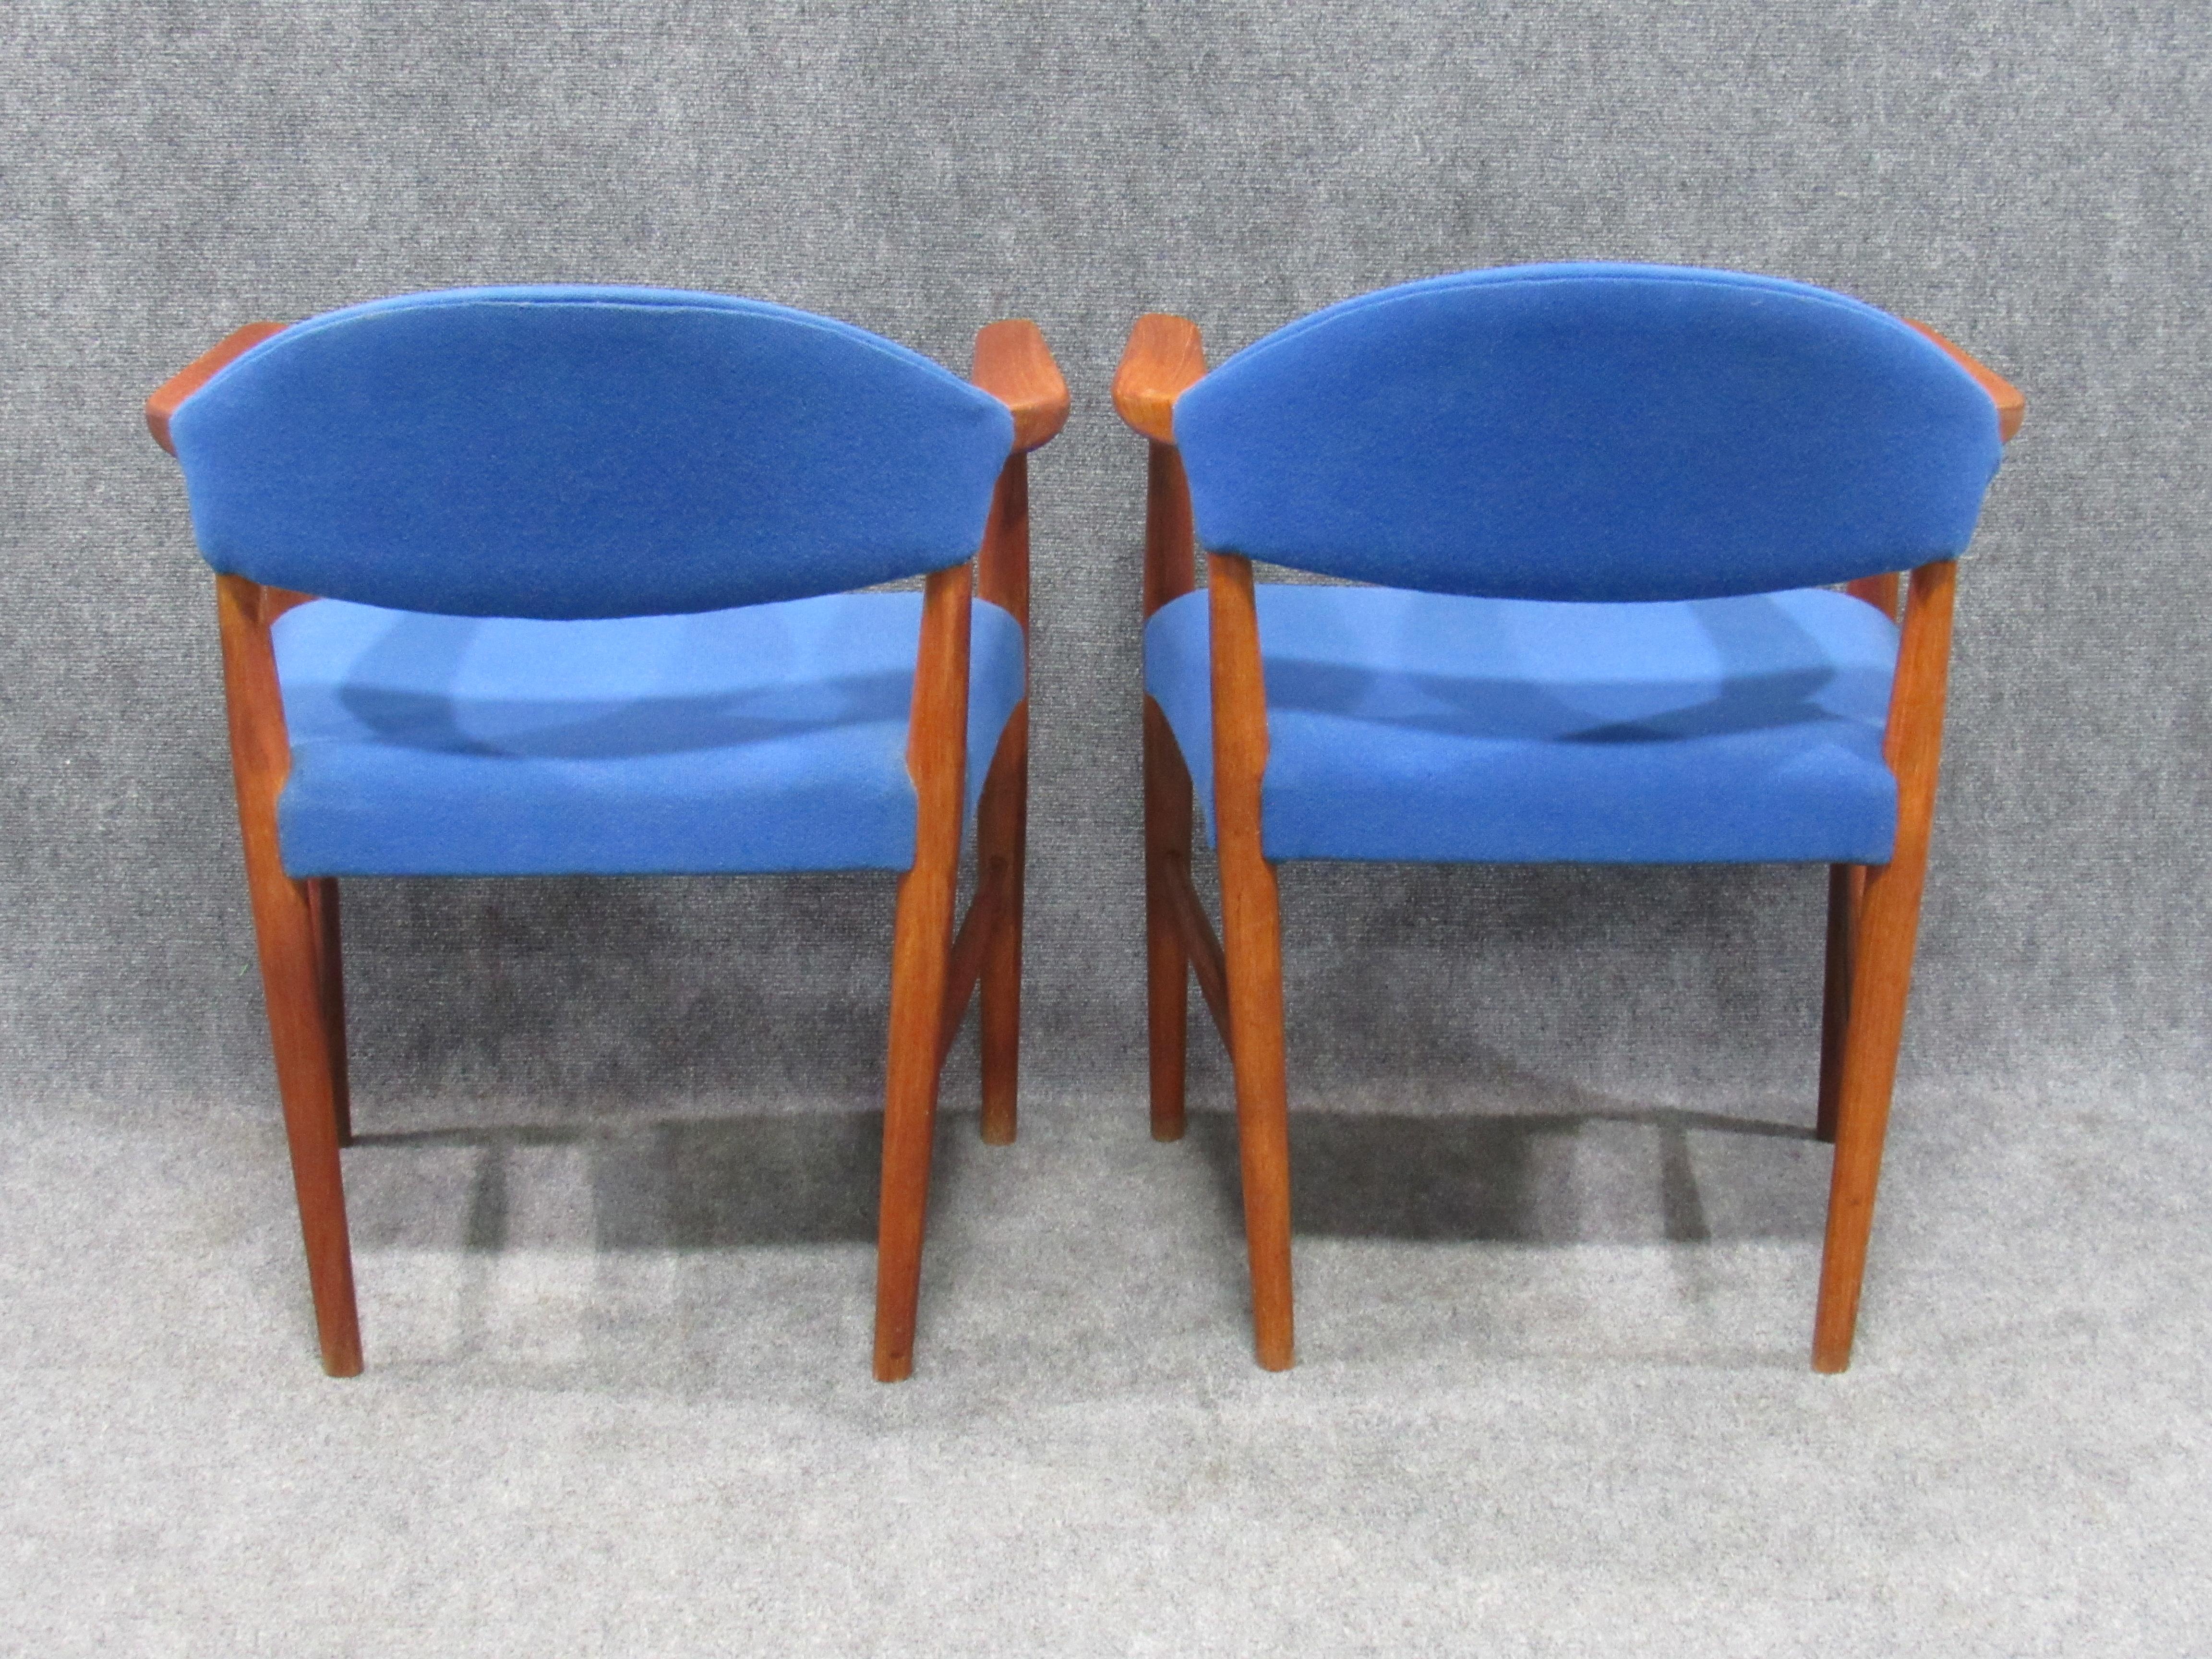 Danish Mid-Century Modern Teak and Blue Wool Armchairs Attributed to Hans Wegner For Sale 7